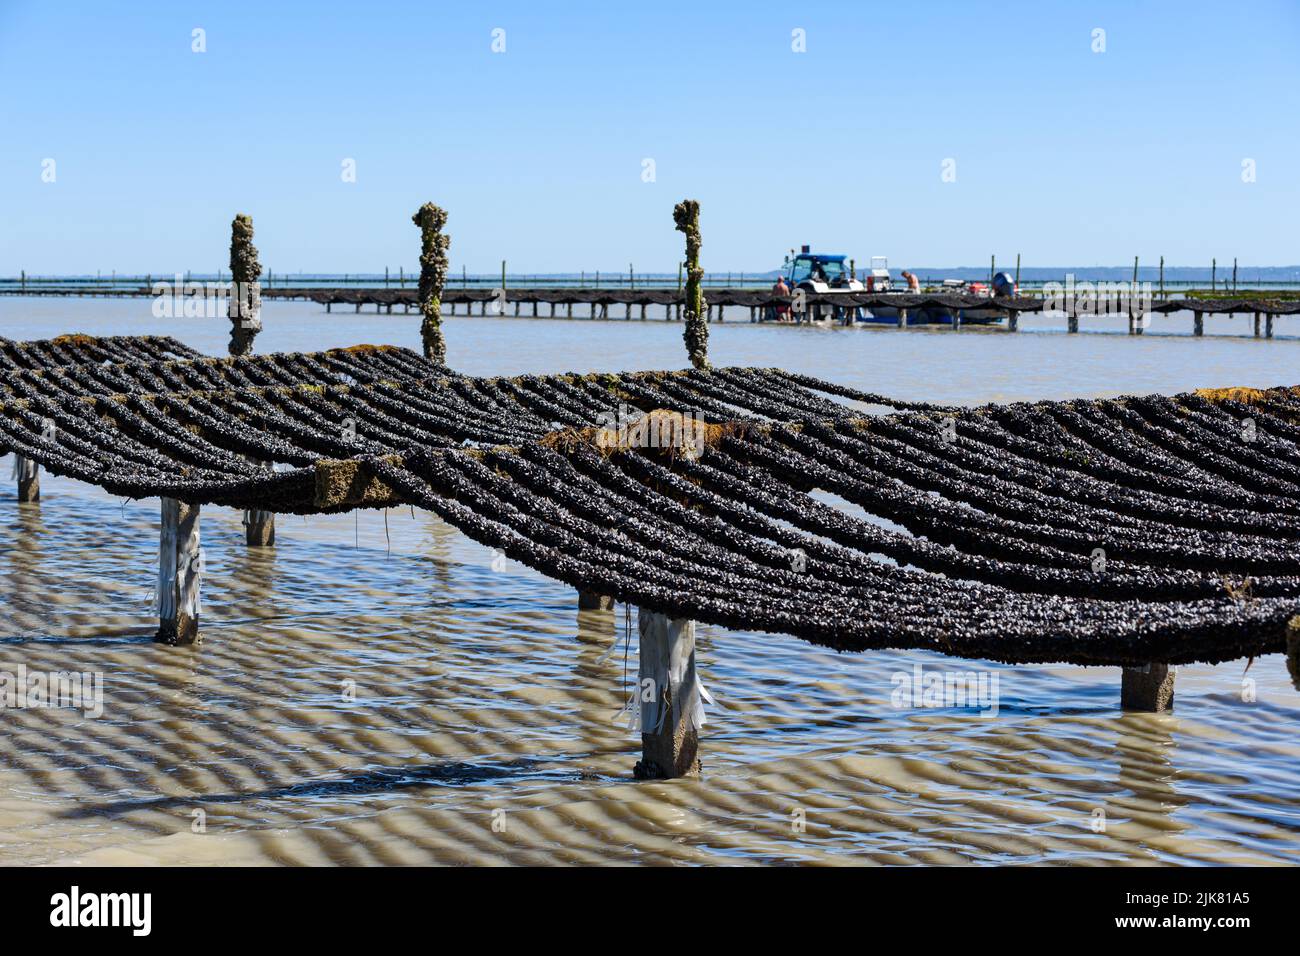 Mussel farming in the bay of Mont Saint-Michel. Cultivation of mussels, known as ‘bouchot’ mussels. Stock Photo